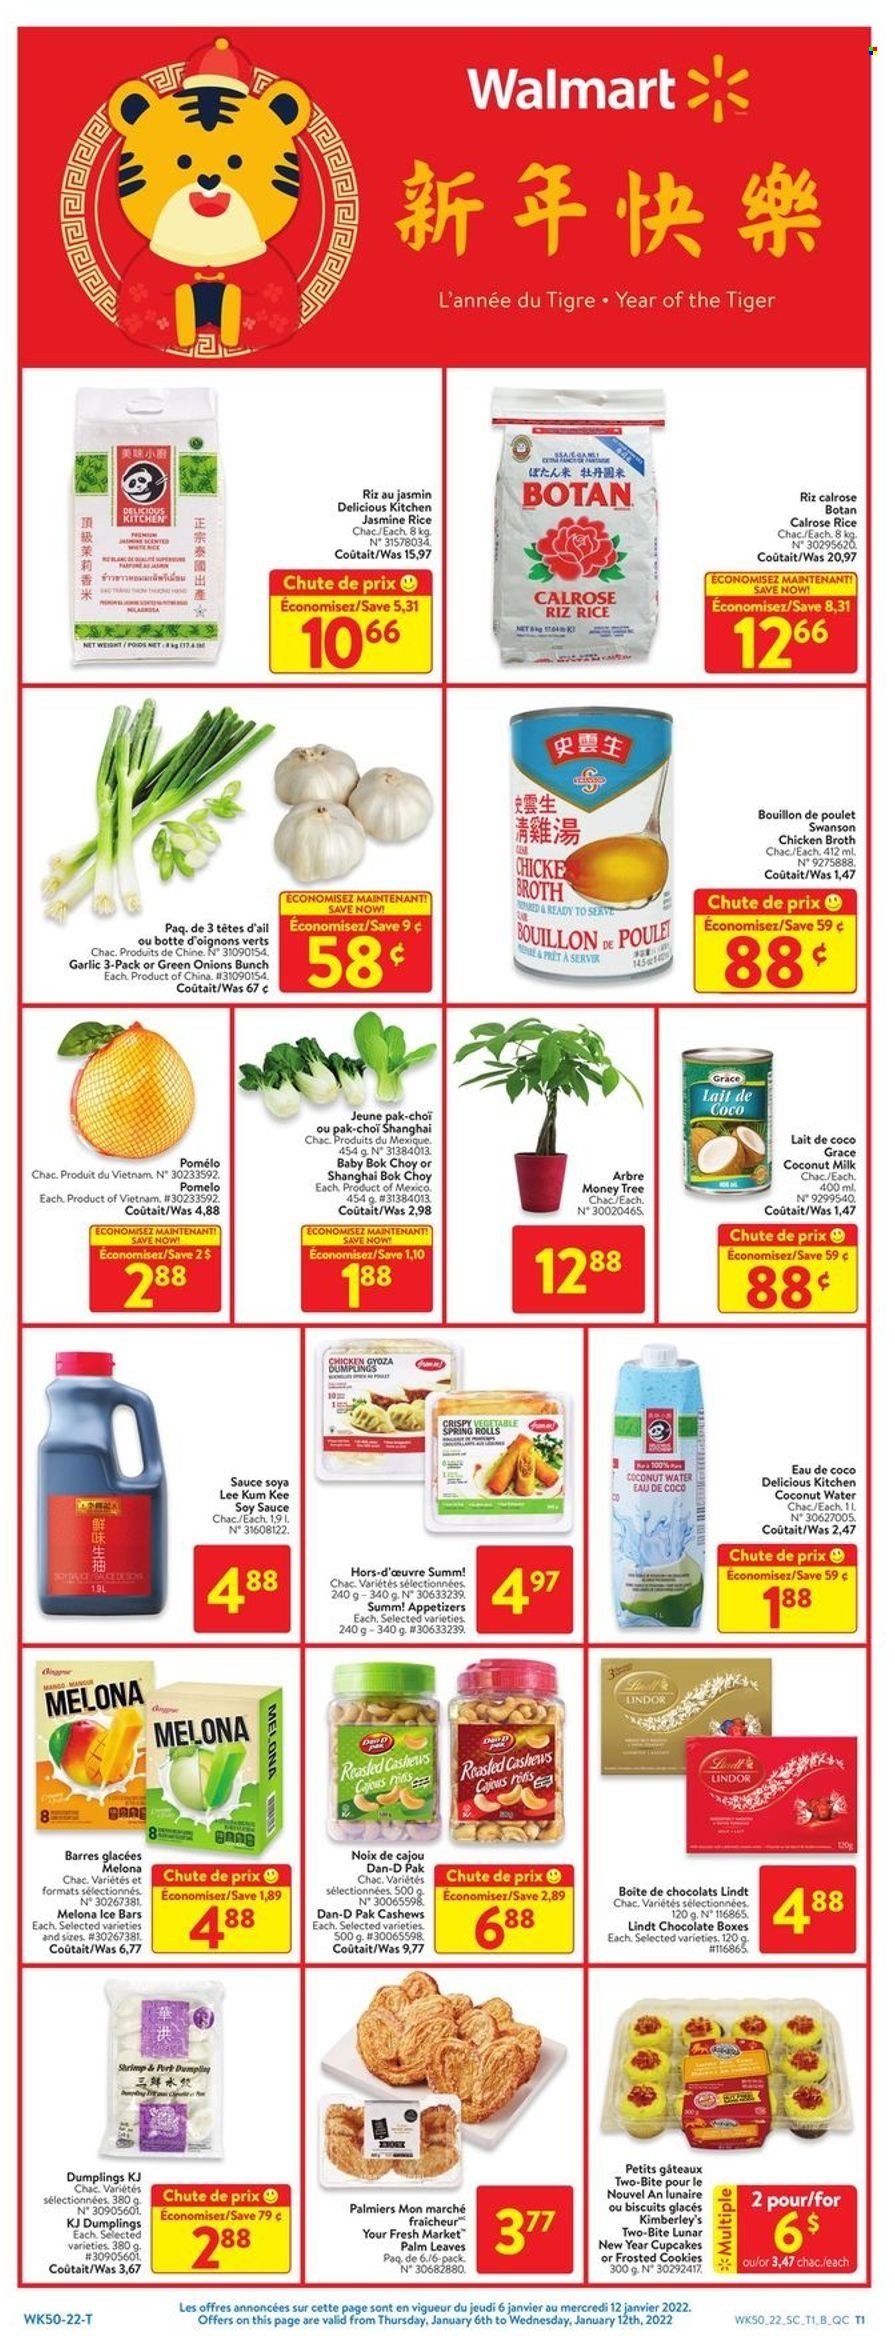 thumbnail - Walmart Flyer - January 06, 2022 - January 12, 2022 - Sales products - cupcake, bok choy, garlic, green onion, pomelo, sauce, dumplings, cookies, chocolate, biscuit, bouillon, chicken broth, broth, coconut milk, Dan-D Pak, rice, jasmine rice, soy sauce, Lee Kum Kee, cashews, coconut water, Lindt, Lindor. Page 3.